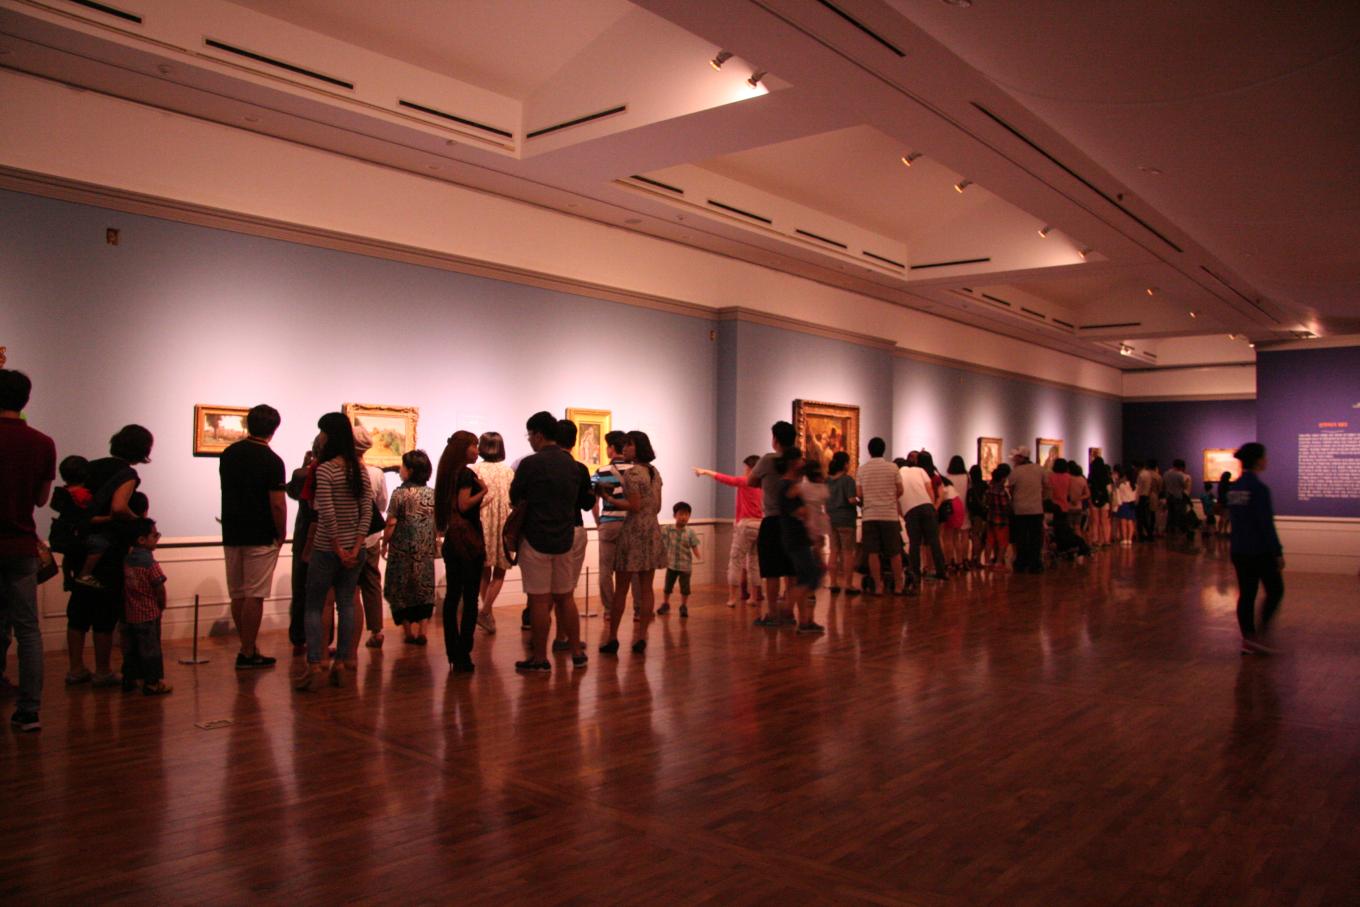 Visitors in the Daejeon Museum of Art galleries